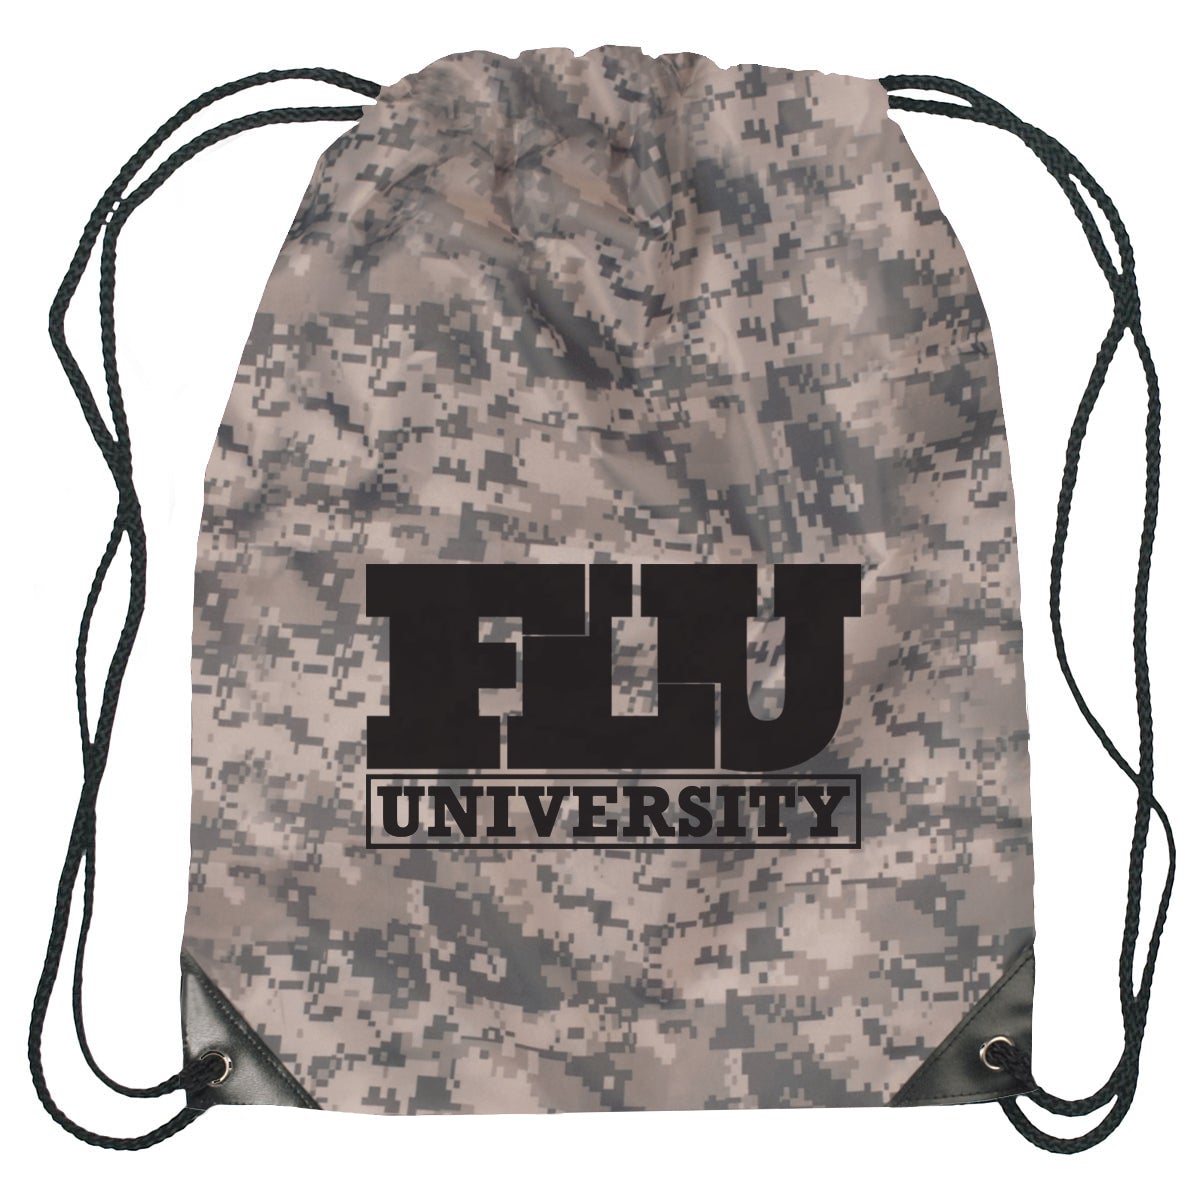 Small Hit Sports Pack Drawstring Bags Hit Promo Digital Camouflage Single Color